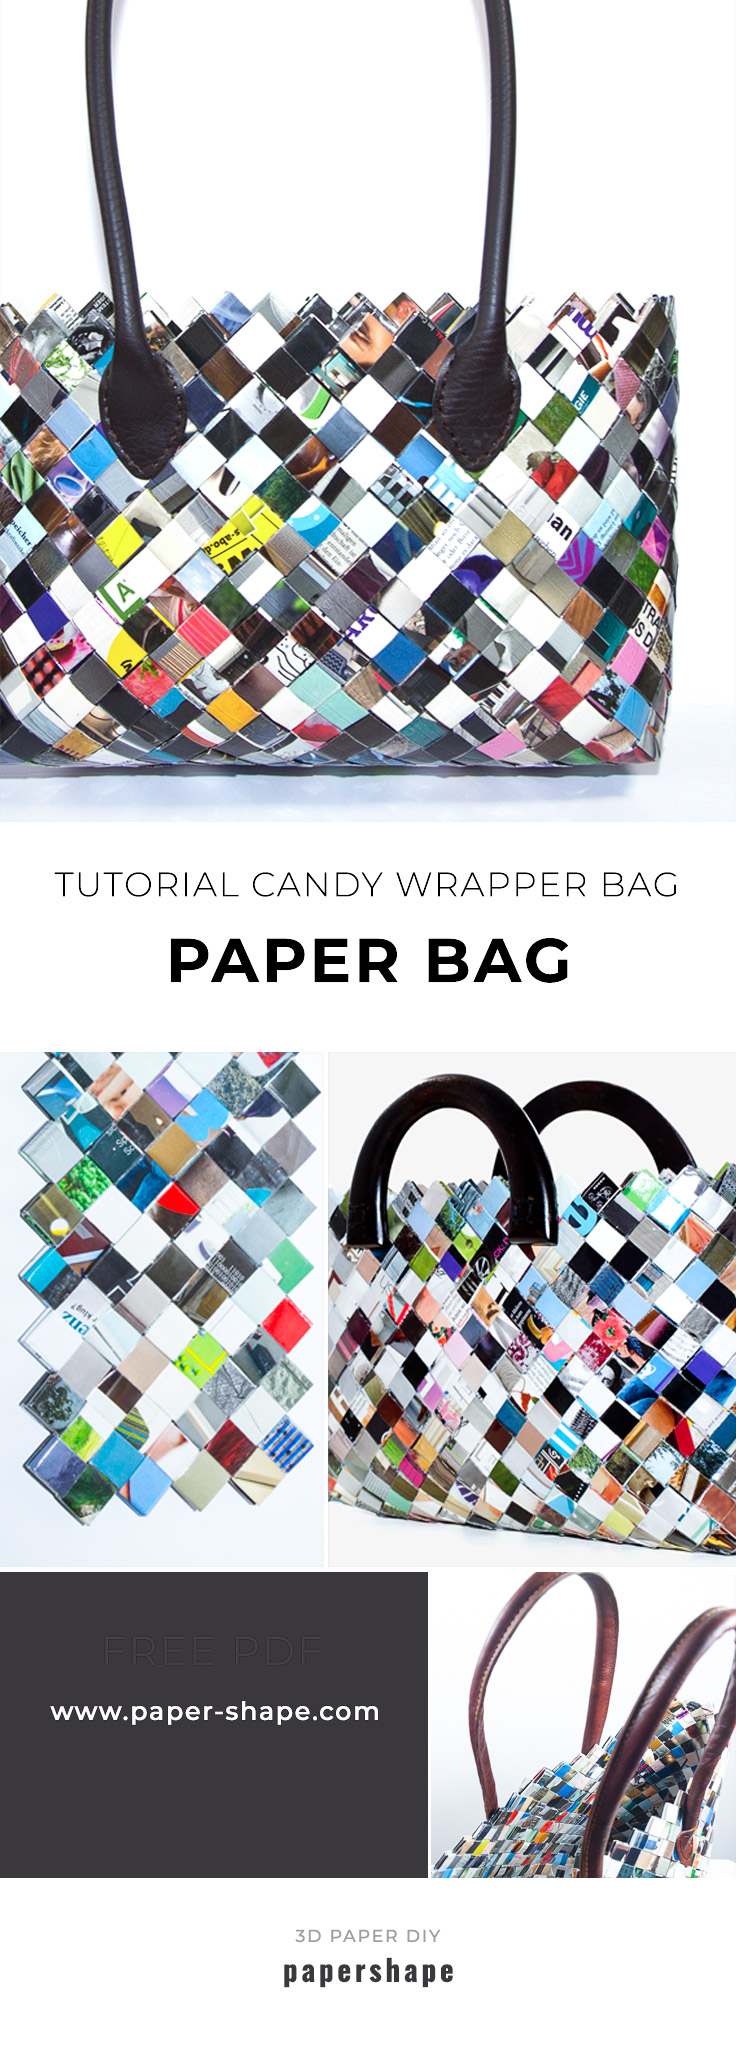 tutorial: candy wrapper bag from magazine leftovers diy #papershape  